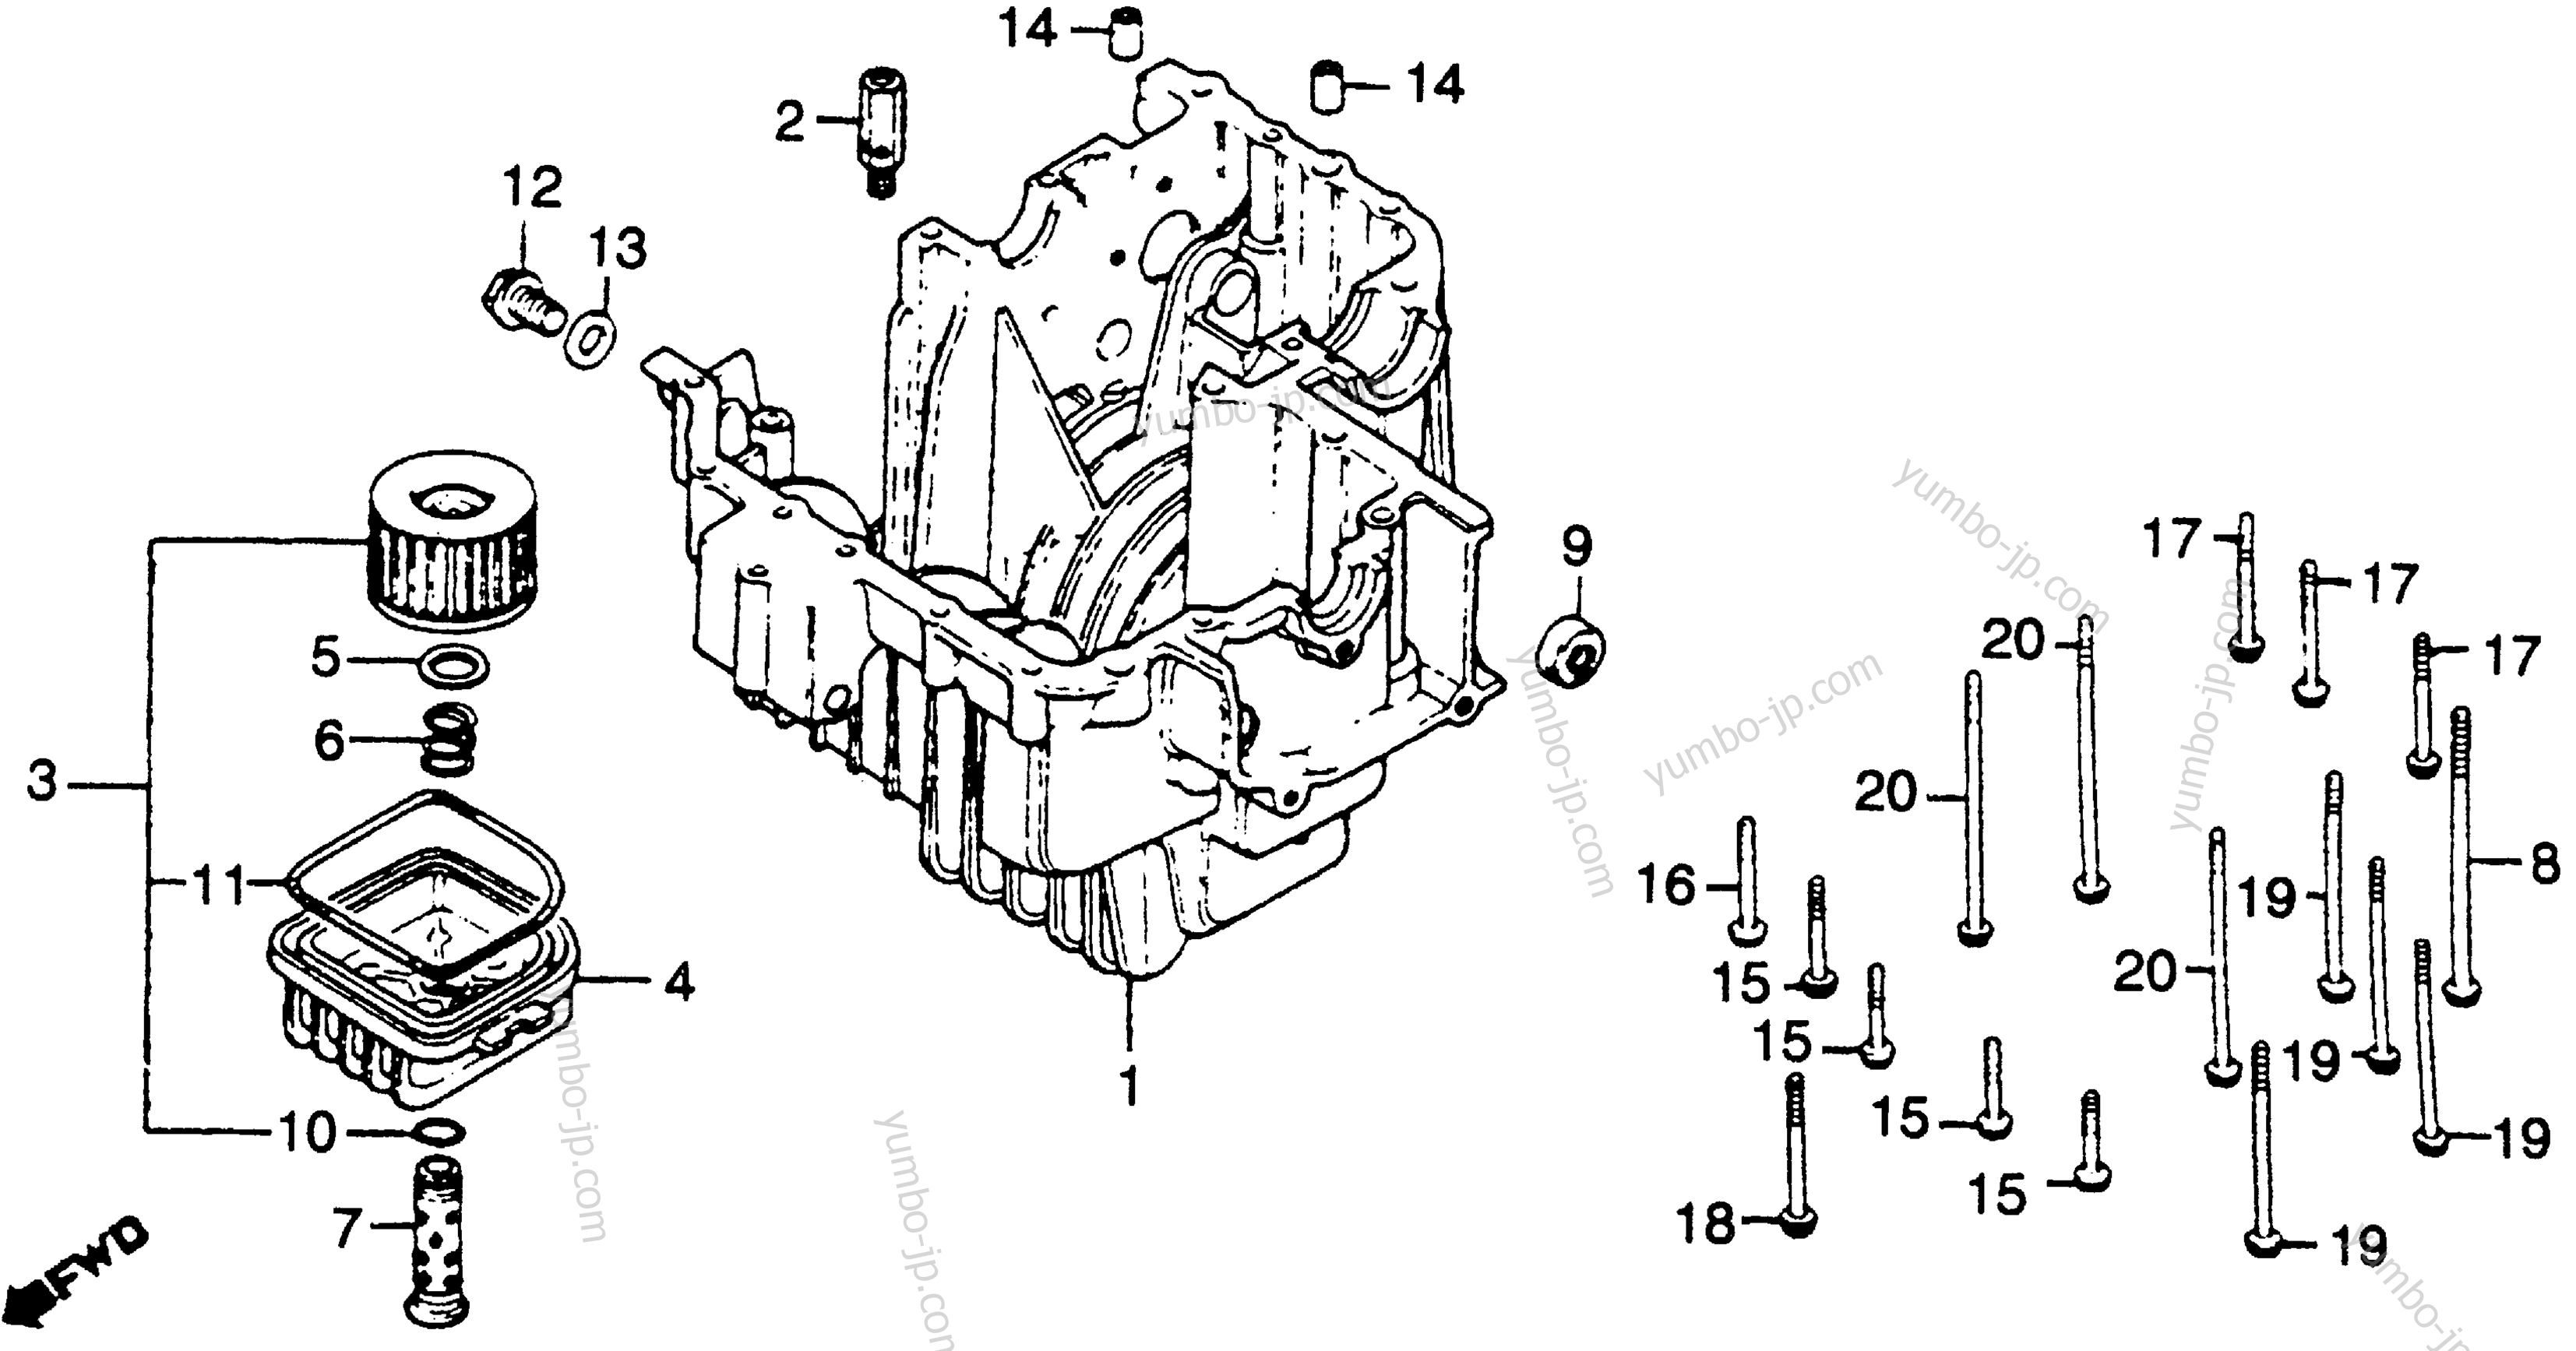 LOWER CRANKCASE for motorcycles HONDA CM400E A 1980 year